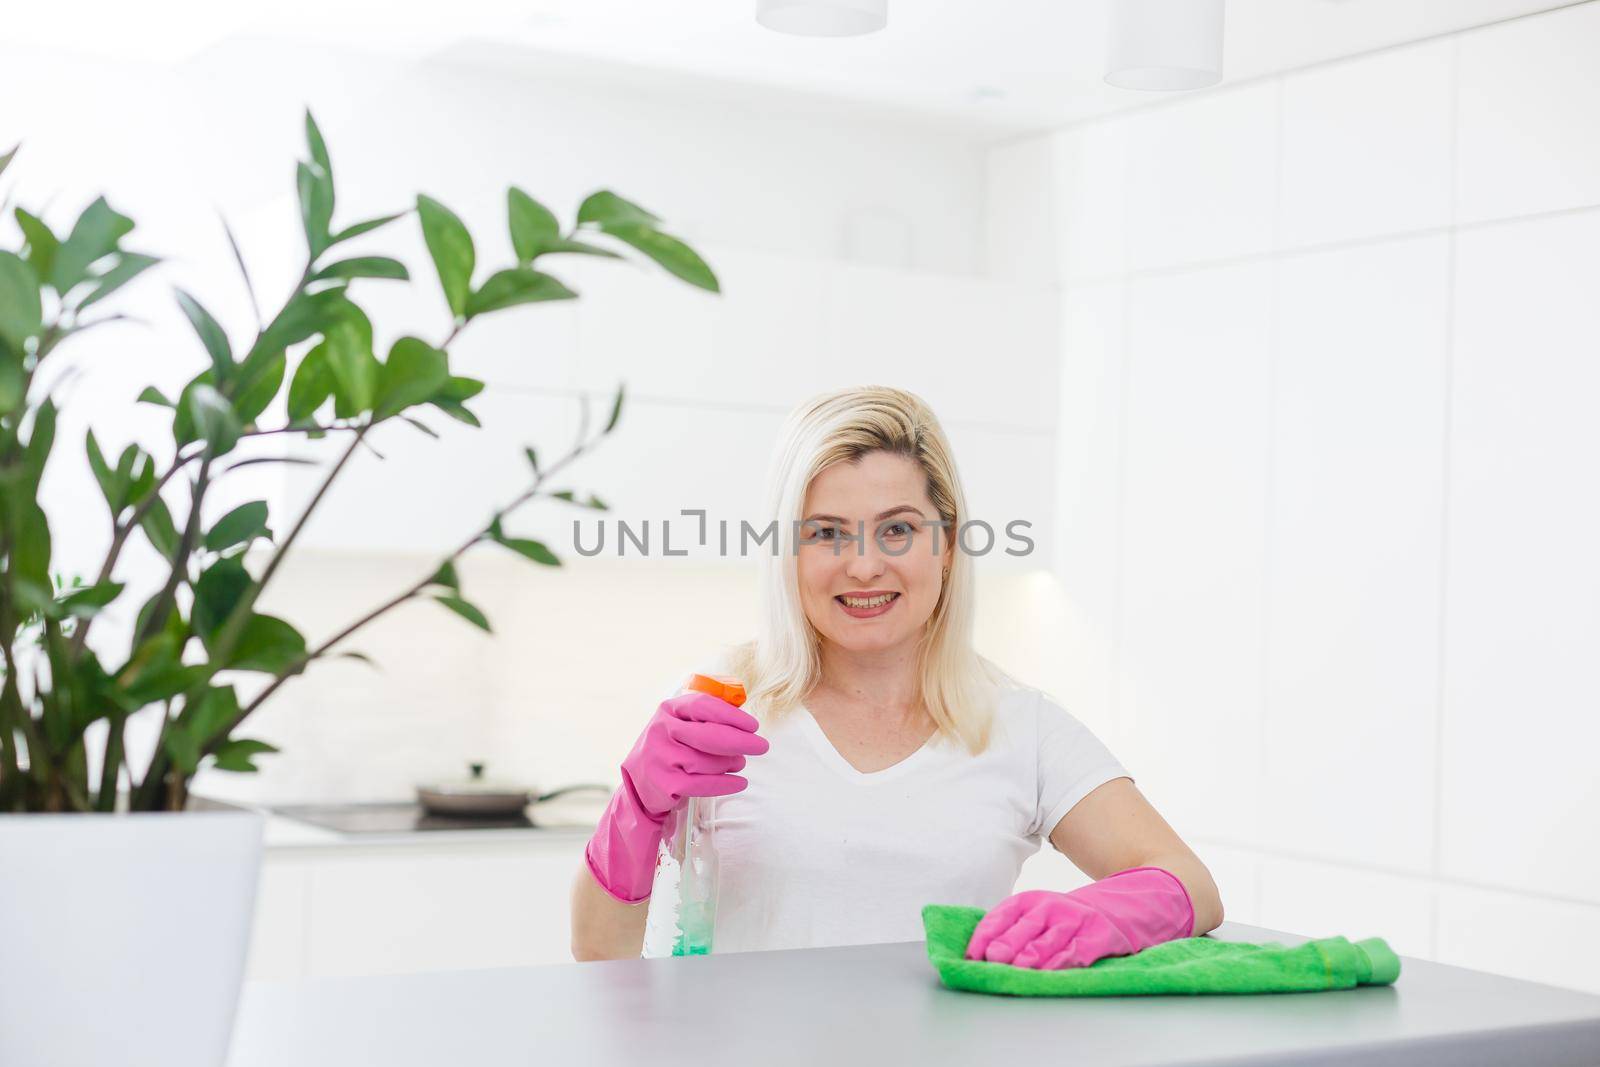 Cleanness is in trend. Pretty smiling woman wiping table with cloth and special means of washing by Andelov13